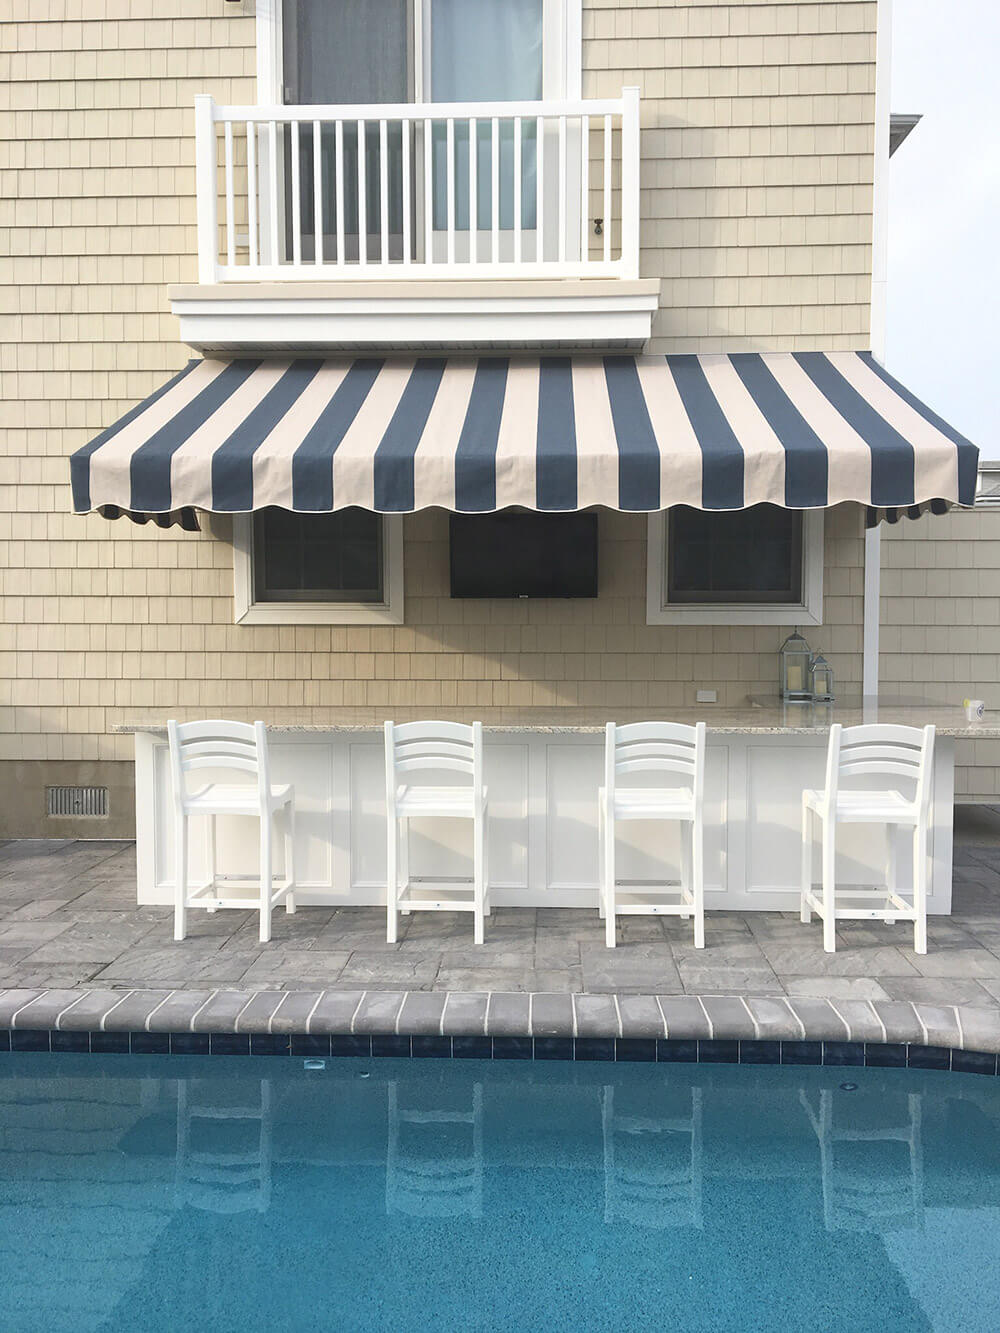 South Jersey Residential Commercial Awnings Berges Awning Inc